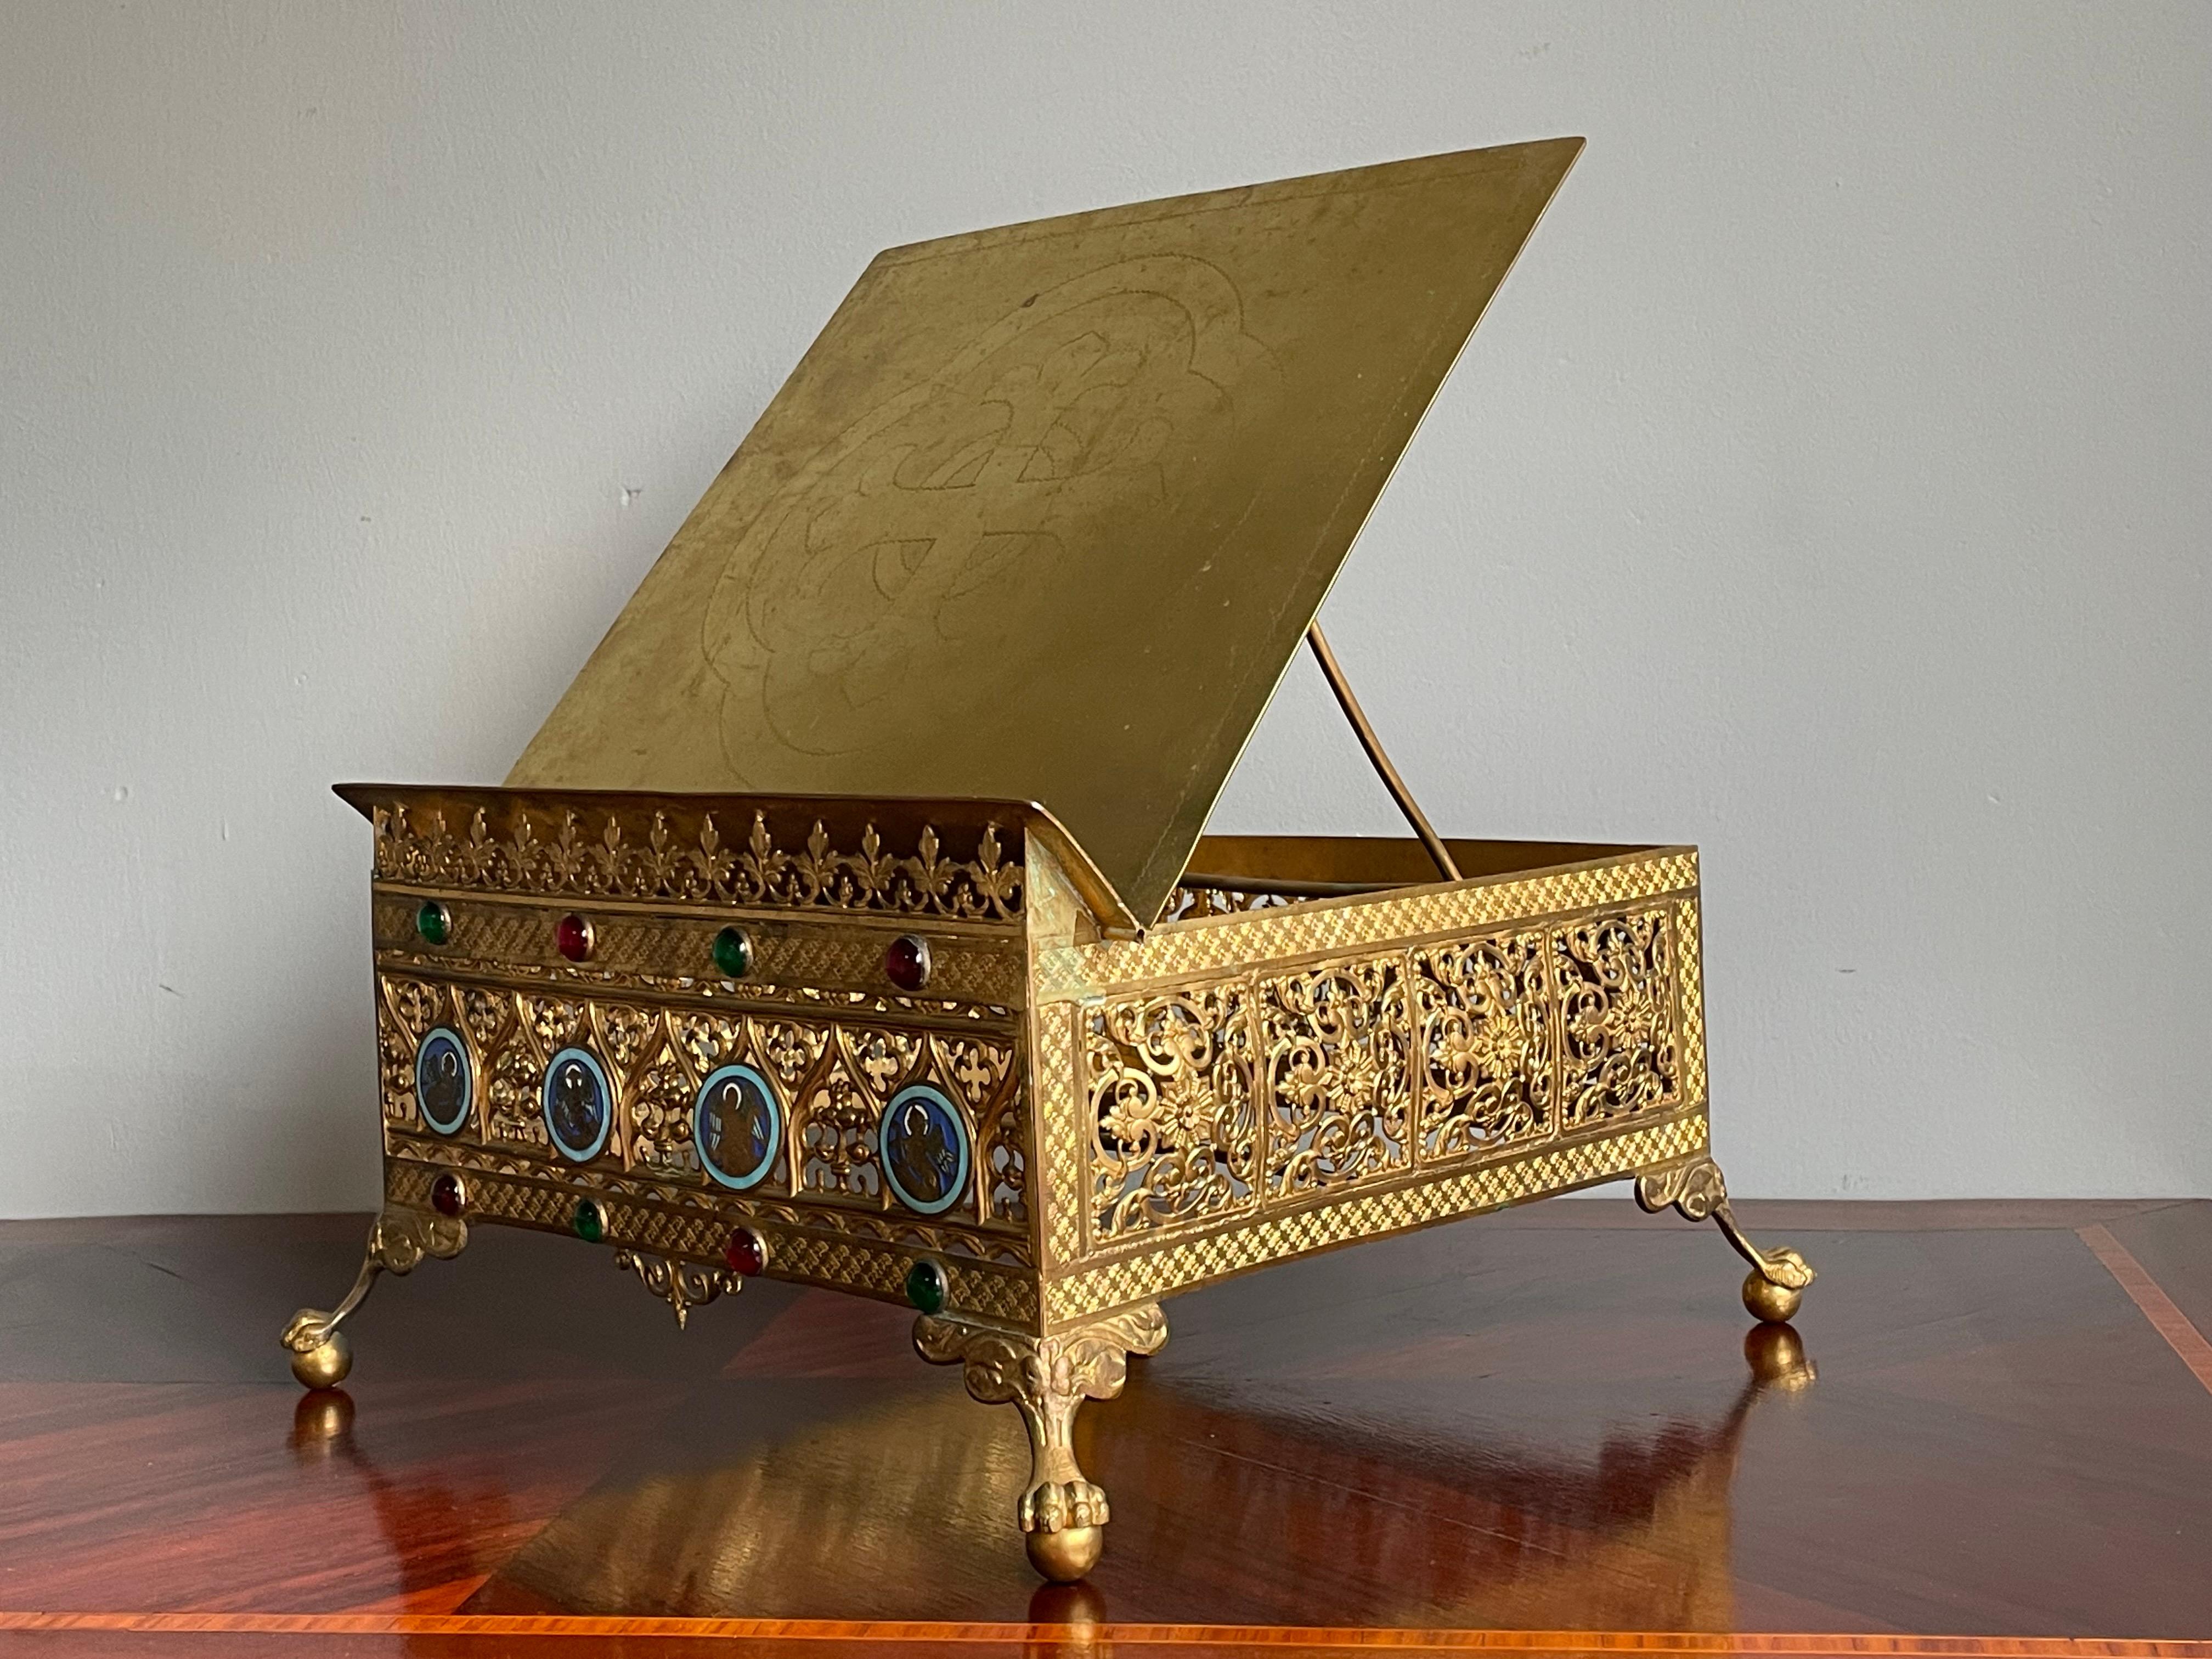 Stunning 19th century Gothic church bible stand with evangelist cloisonné symbols.

This rare, late 1800s, gilt bronze bible stand has beautiful details and it is in remarkably good condition. The stunning design with the detailed and gilt Gothic